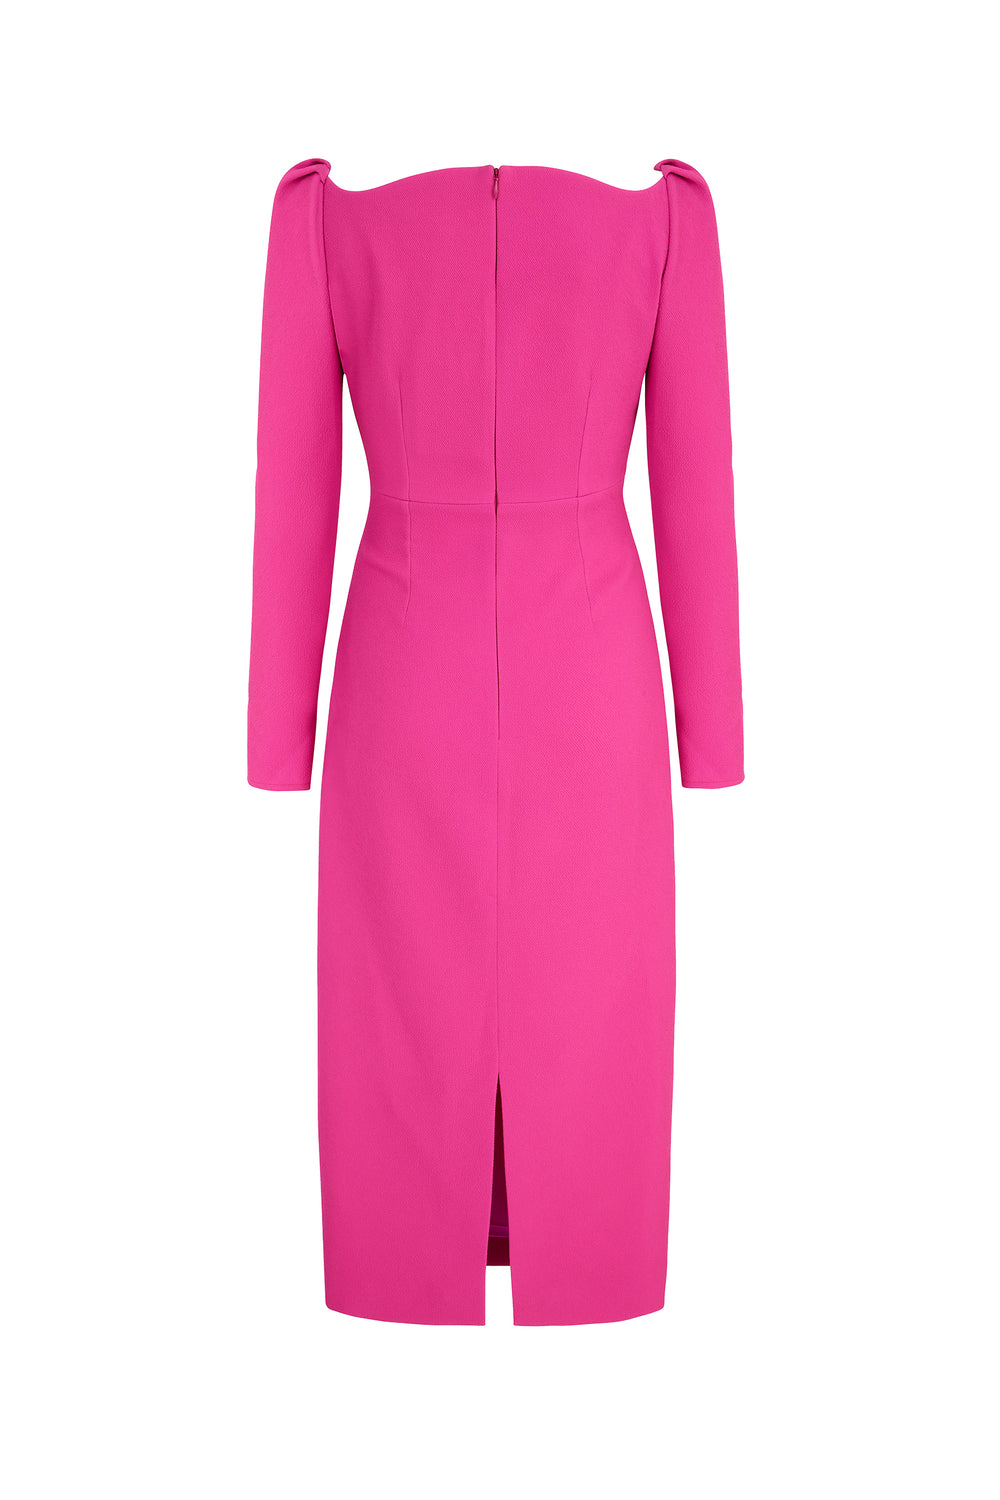 Halley Dress | Hot Pink Stretch Crepe | Suzannah London | 